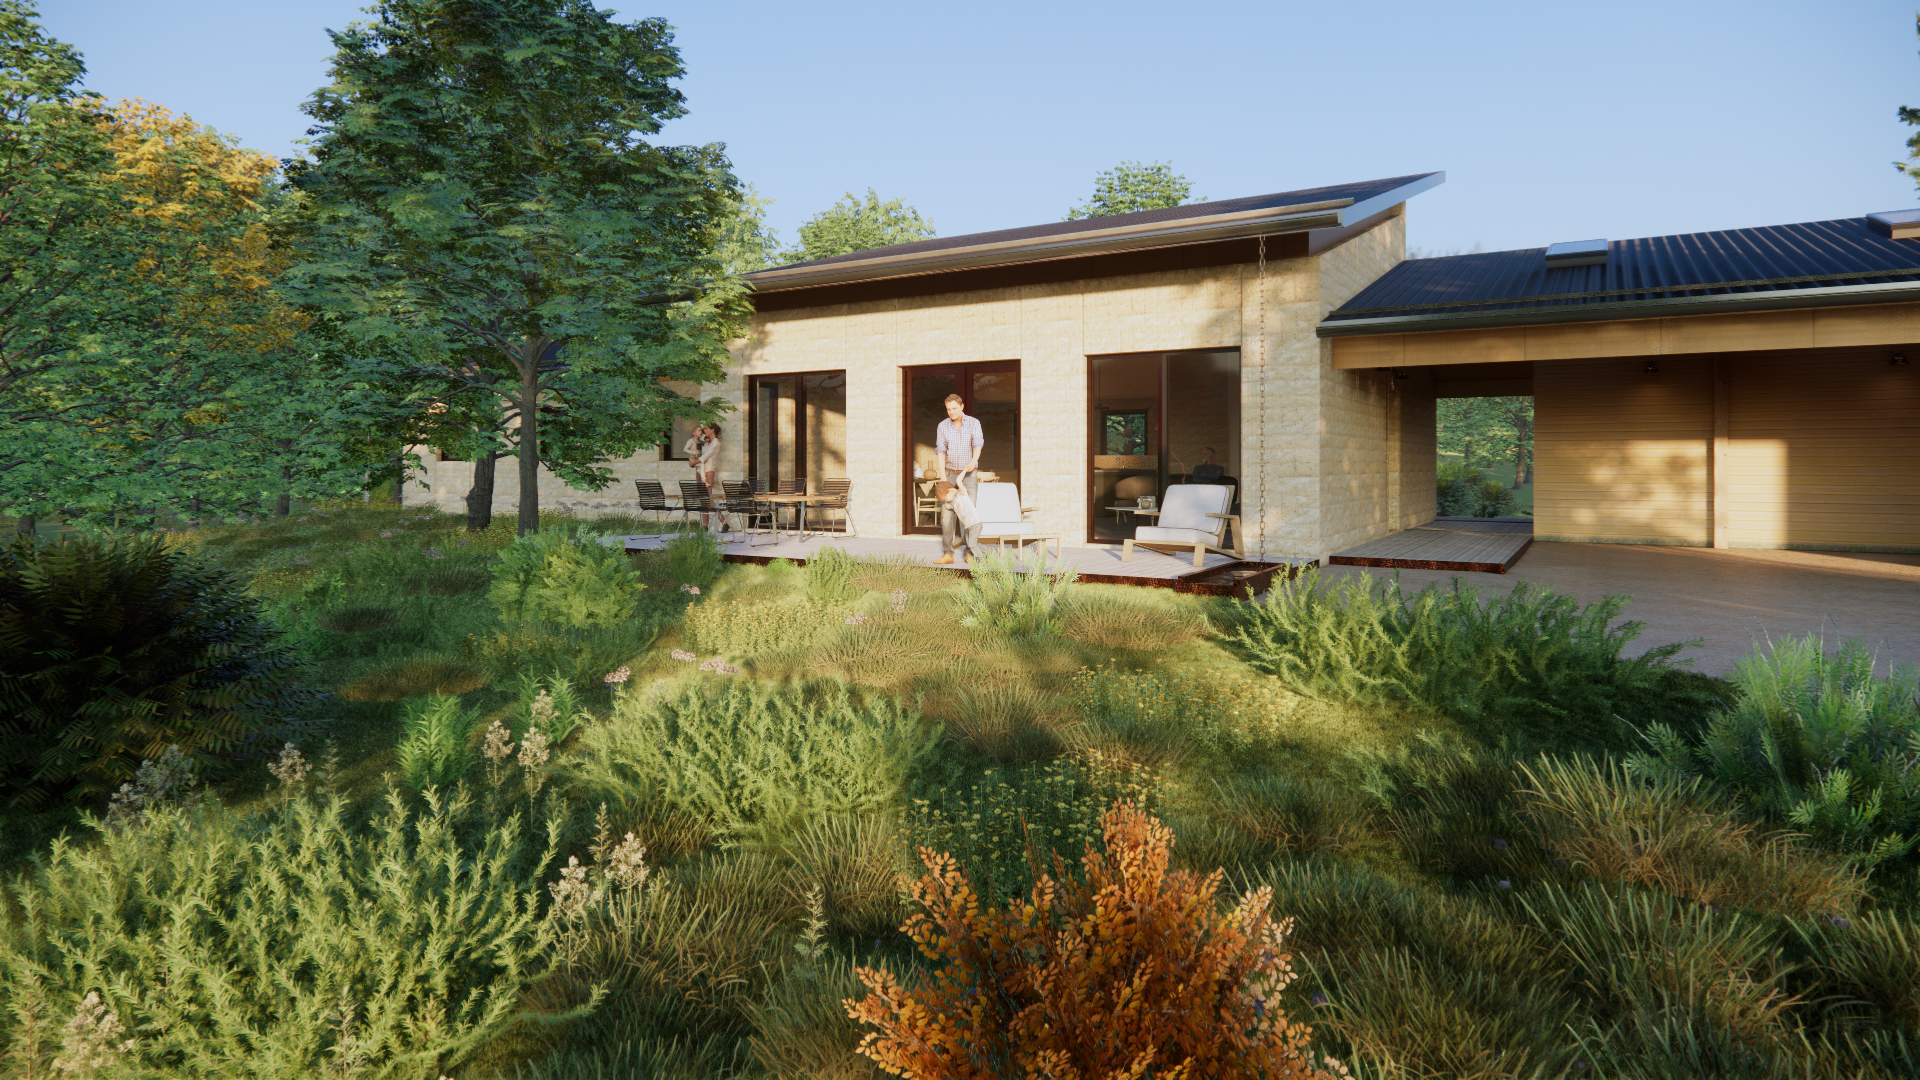 High Performance Rammed Earth Home – Prince Edward Country – Construction begins this week!